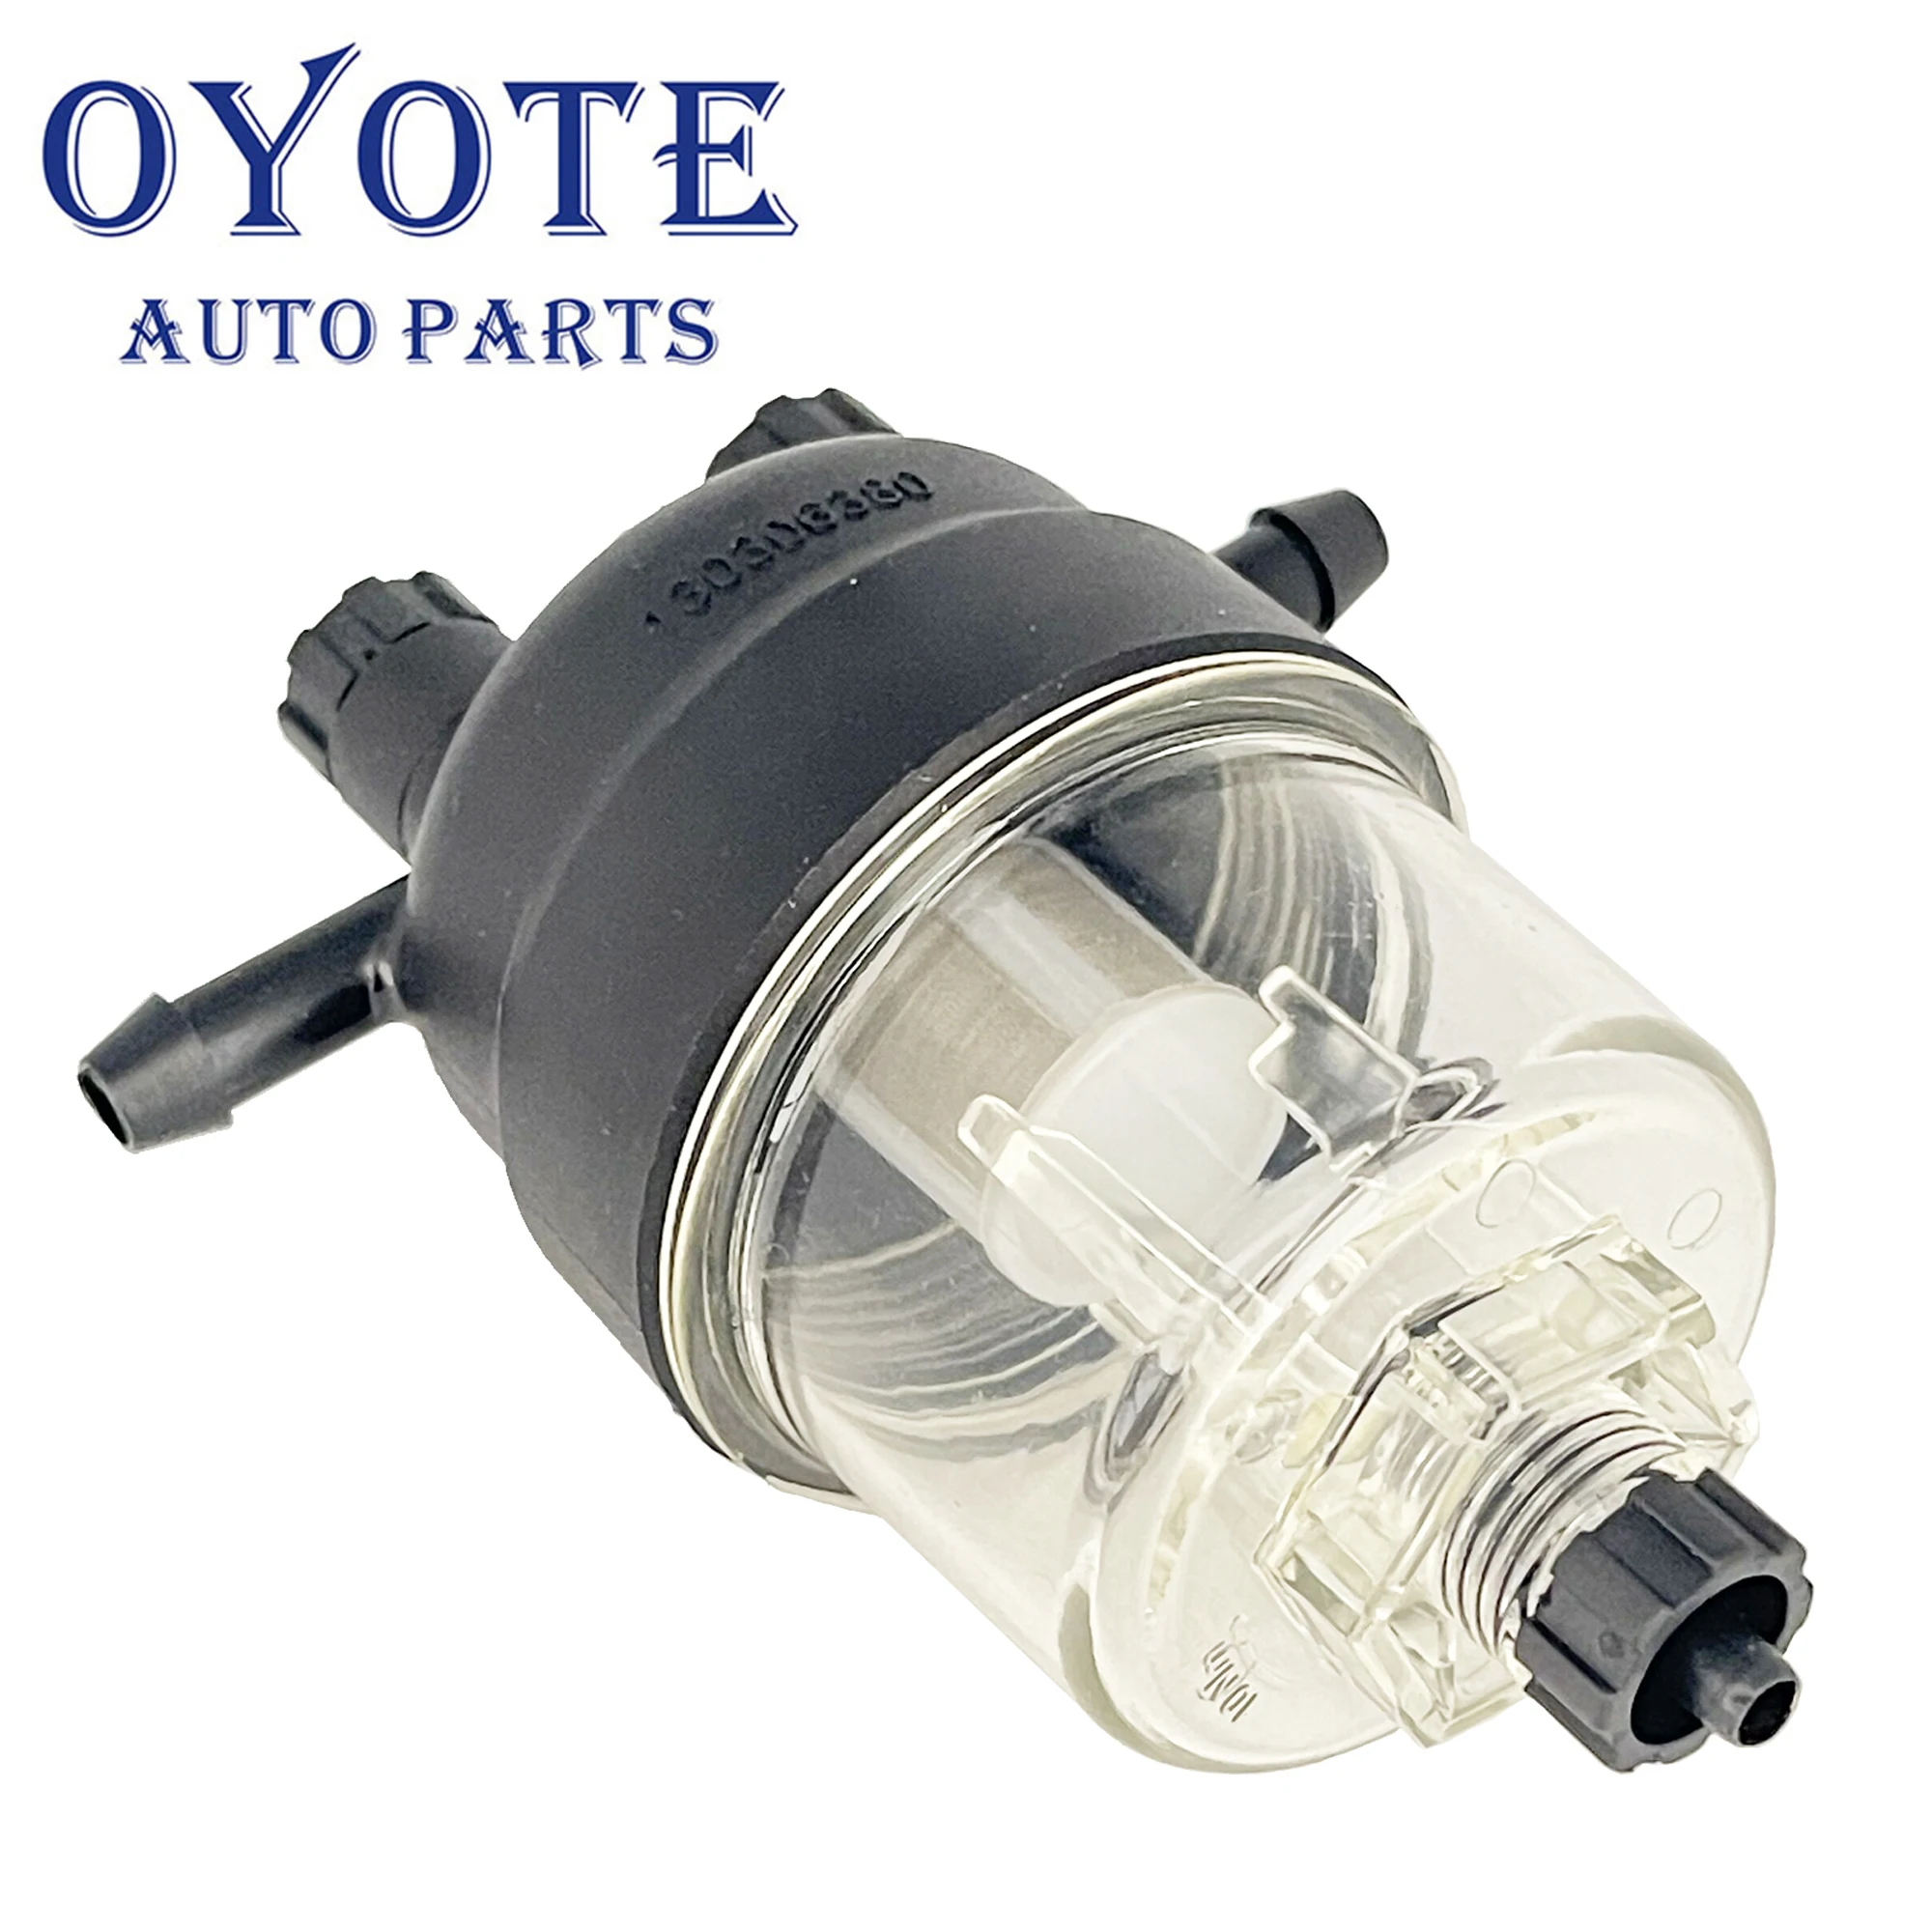 

OYOTE 130306380 0000000038 00000-00038 Fuel Water Separator Filter Assembly For Truck 400 Series Diesel Engine